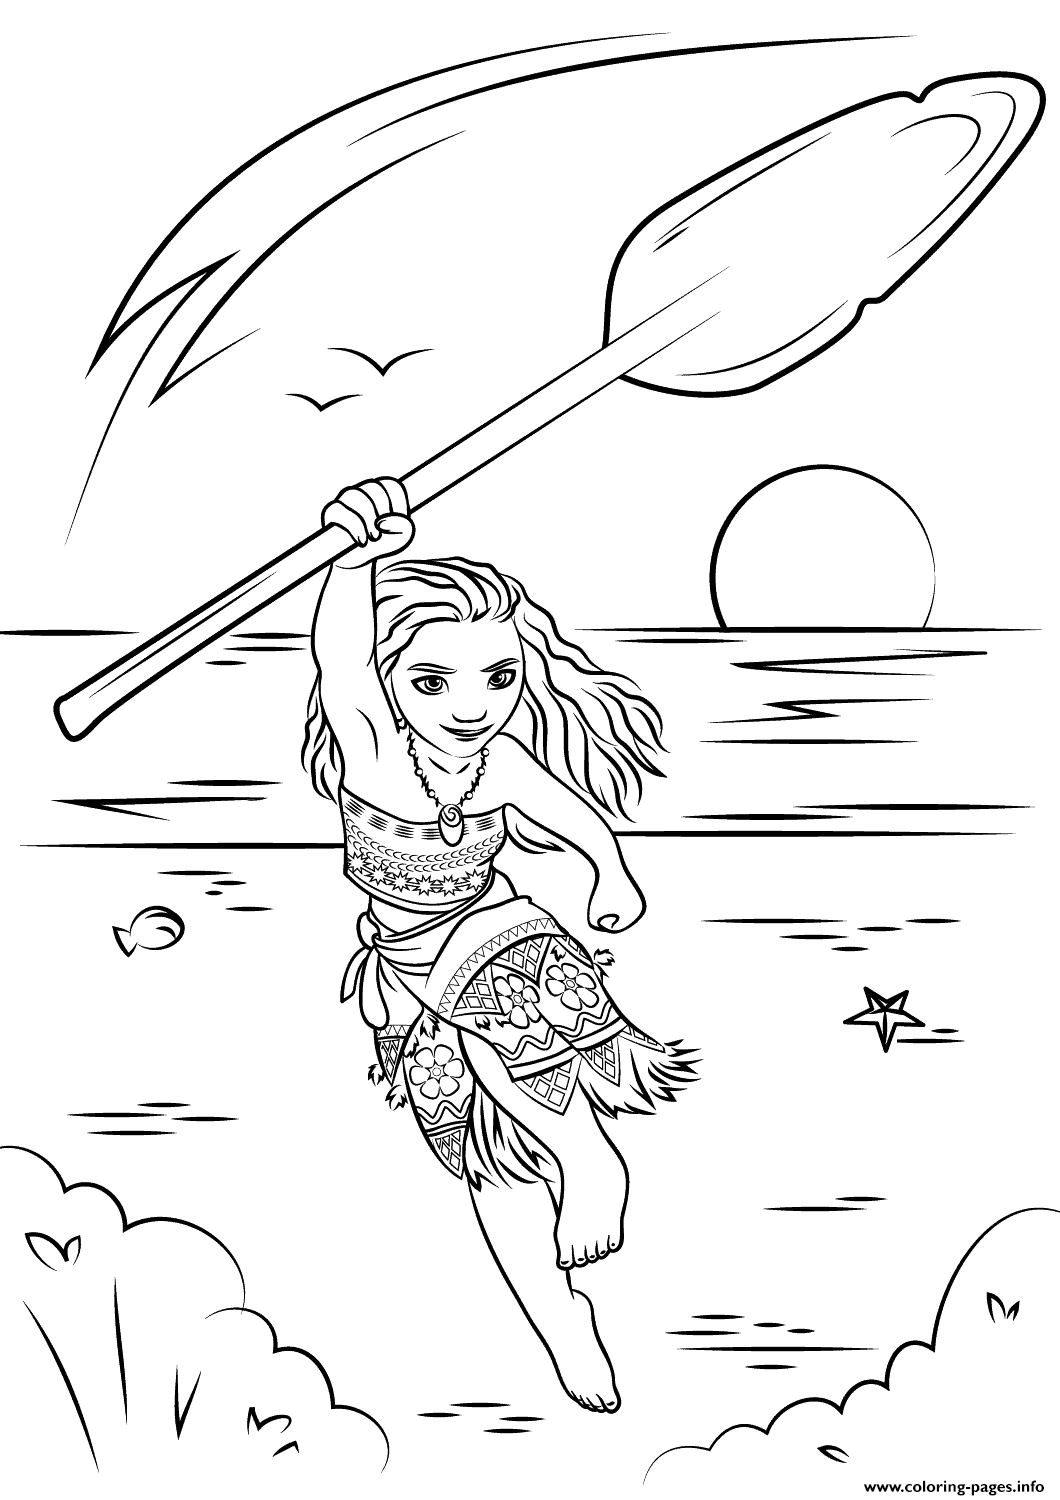 Moana Disney Coloring Page - Coloring Home